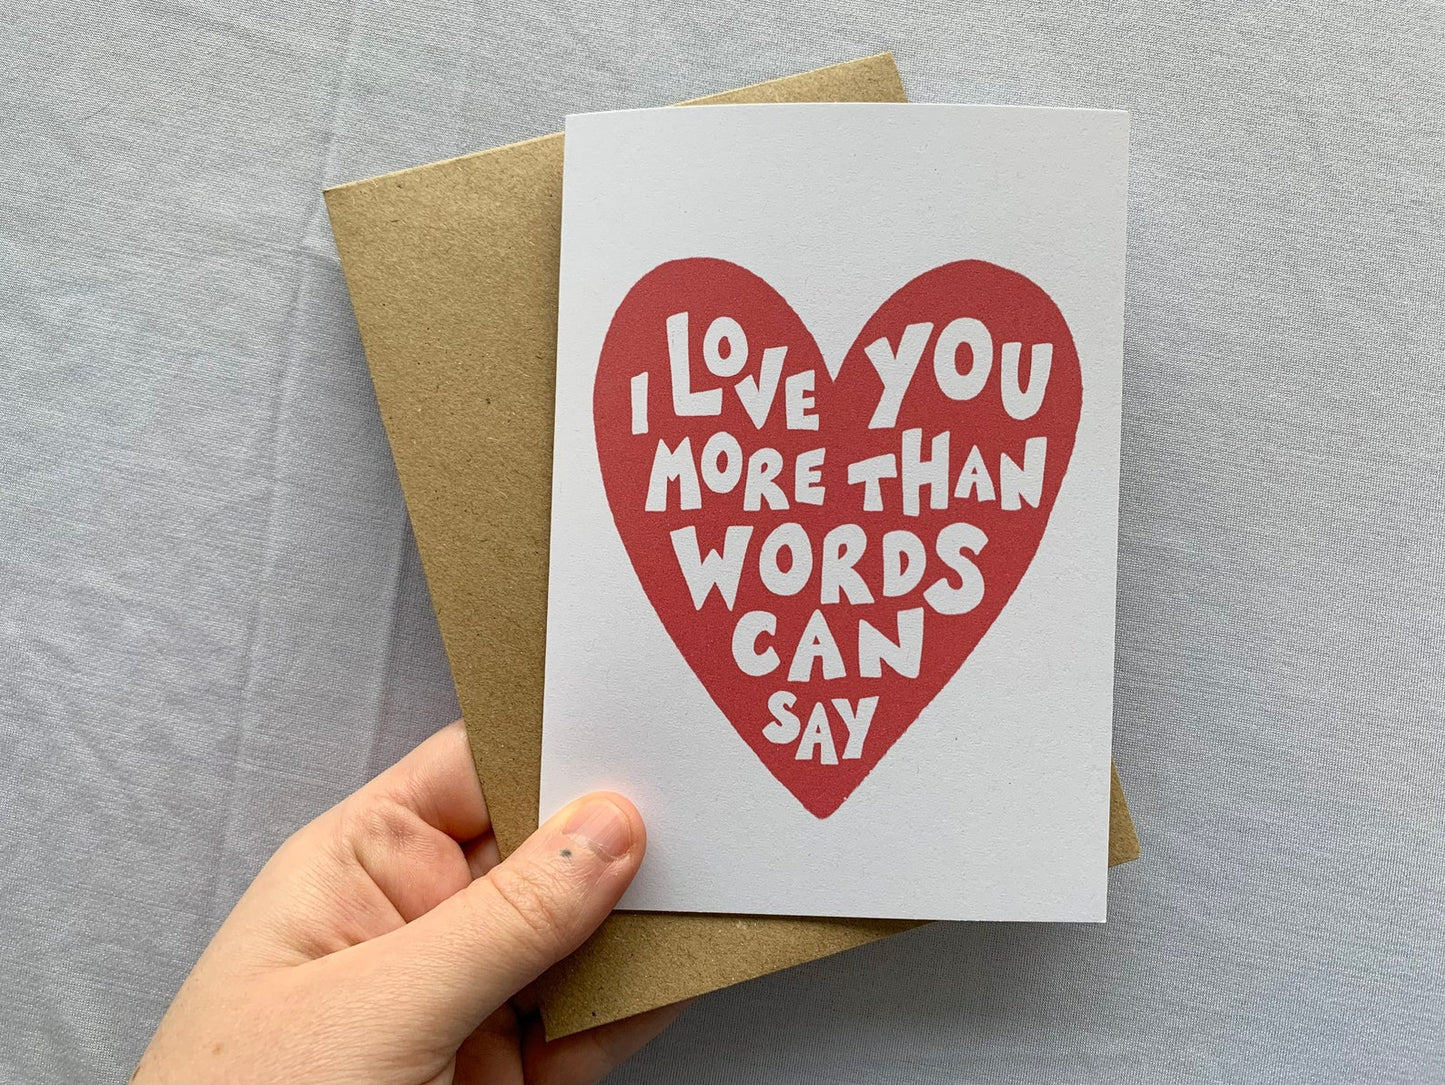 More than words can say card